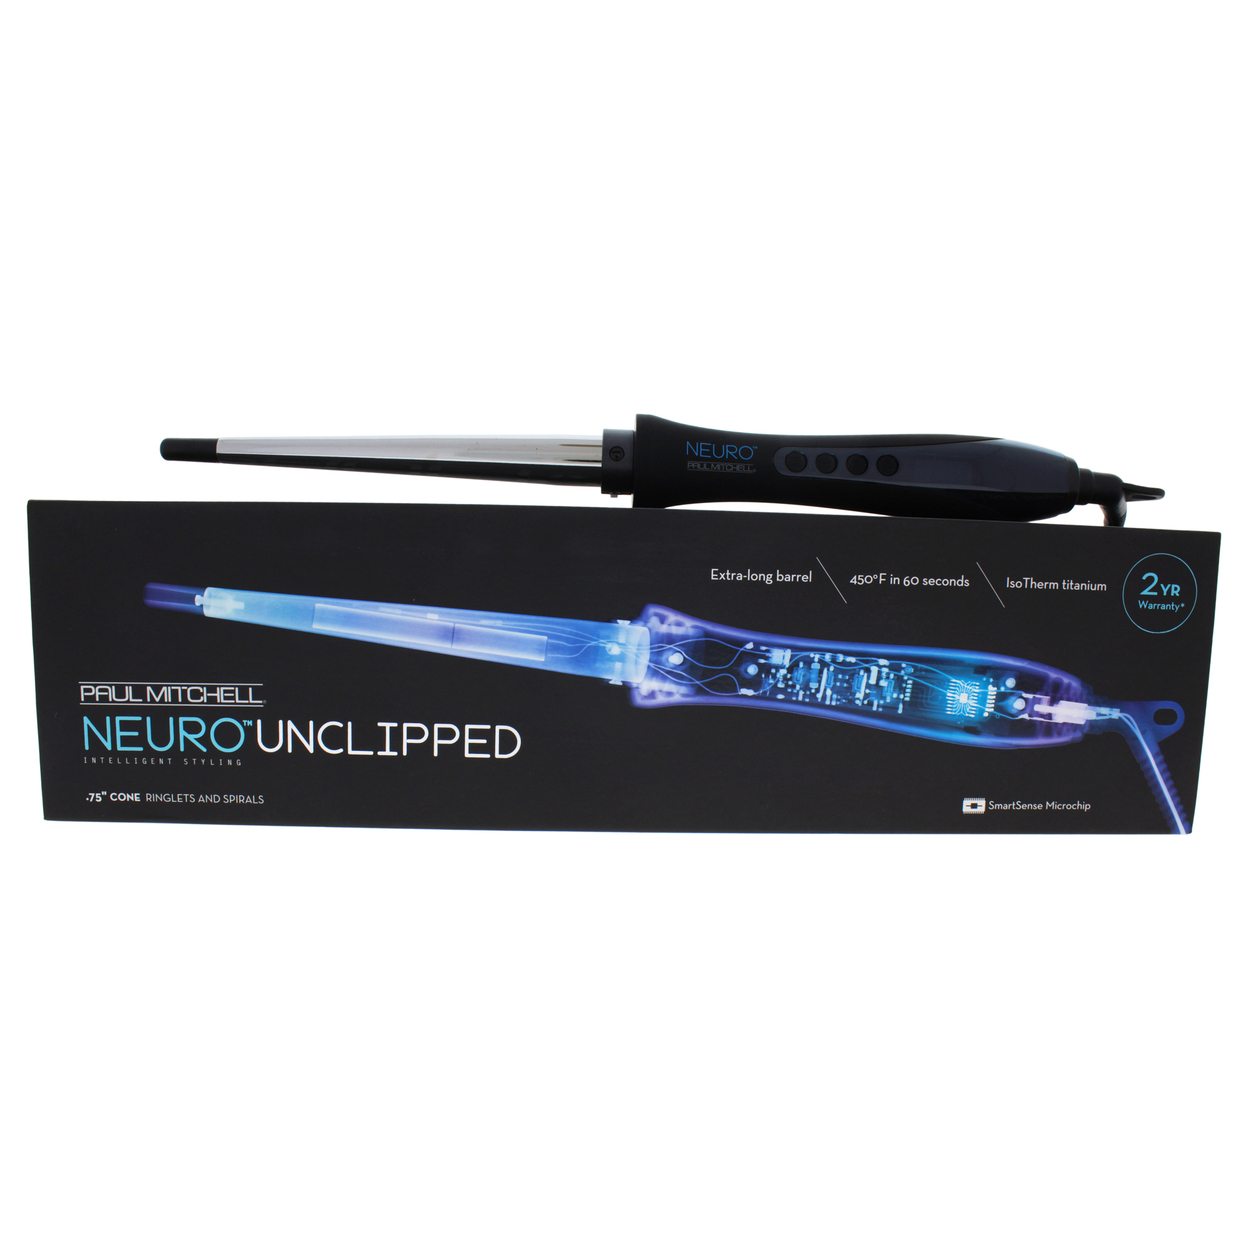 Paul Mitchell Neuro Unclipped Curling Iron - Model # NSSCNA - Black/Silver Curling Iron 0.75 Inch